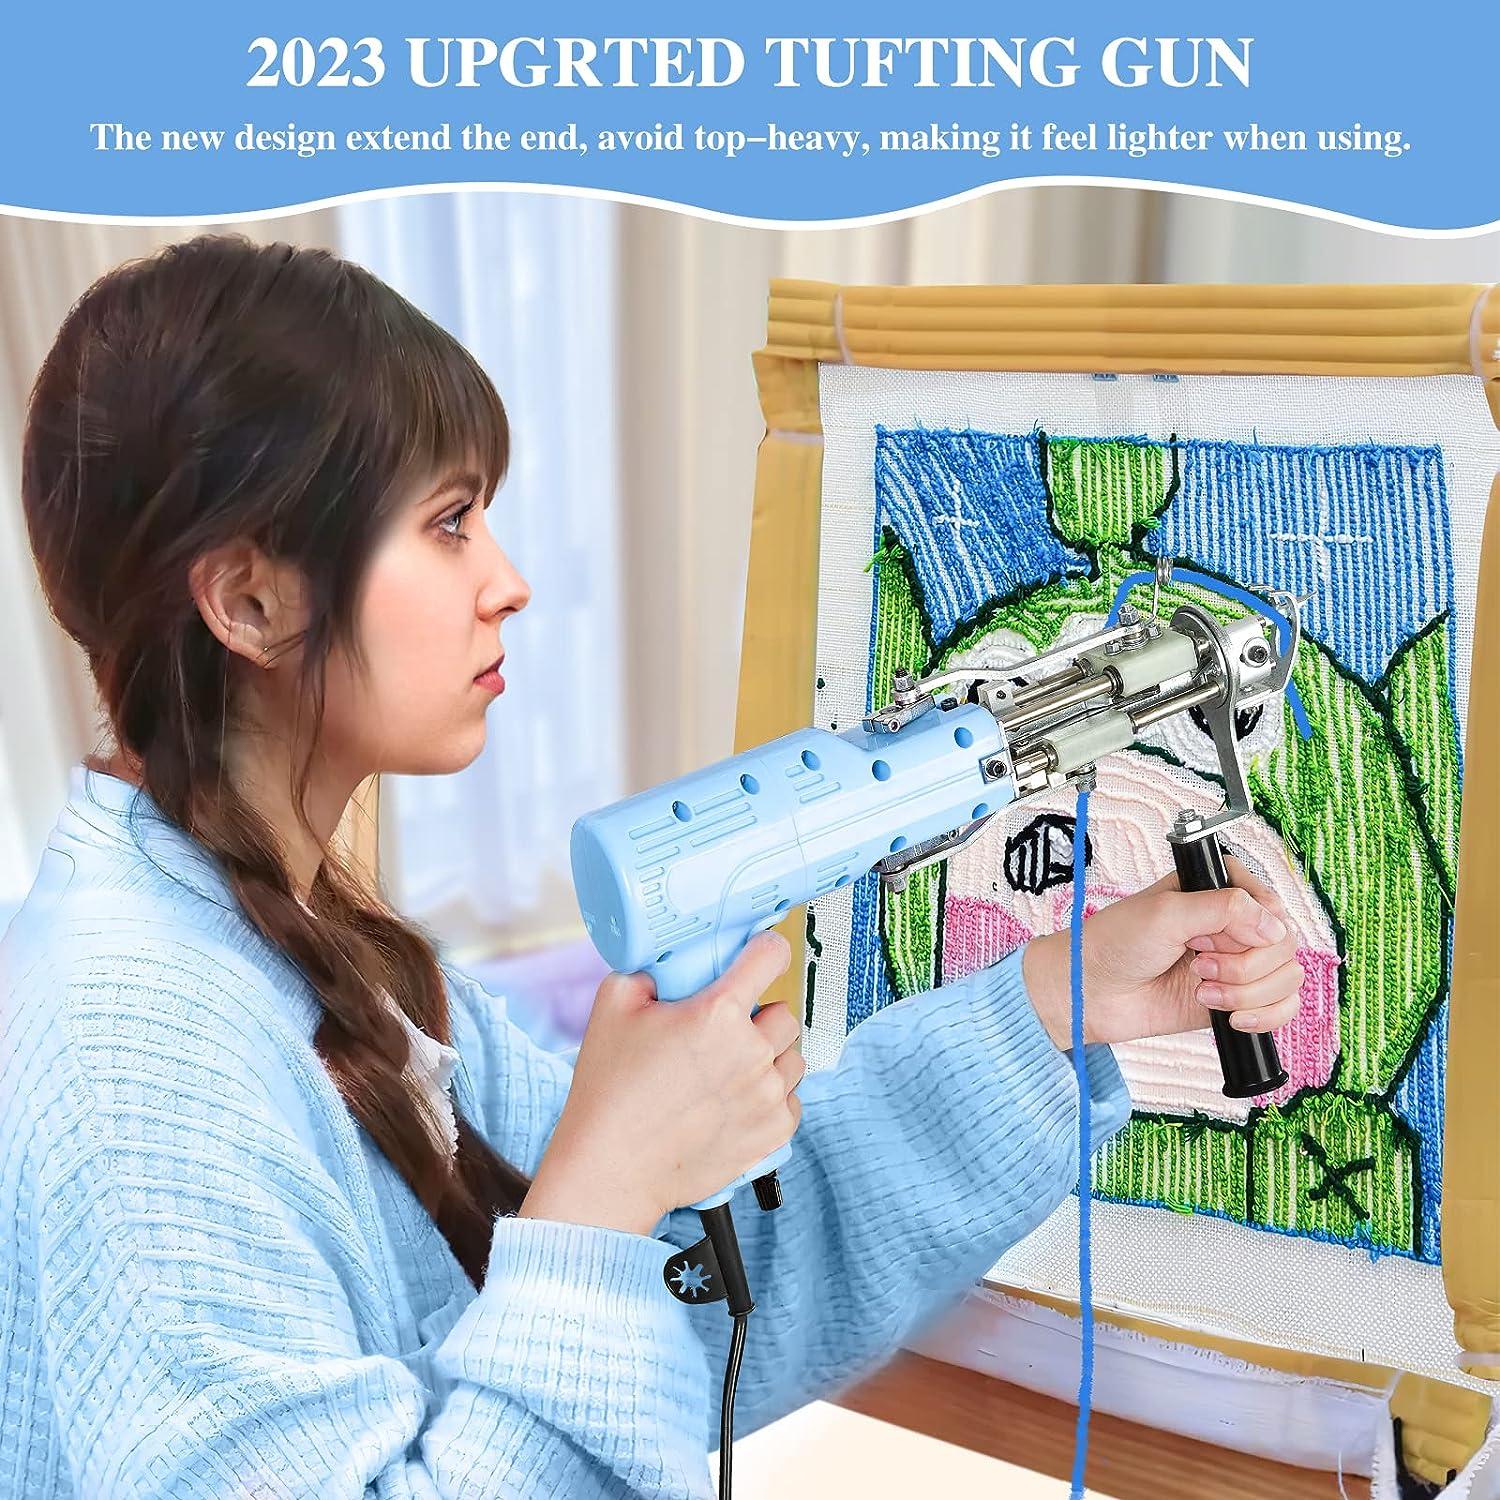 The Best Tufting Guns in 2023